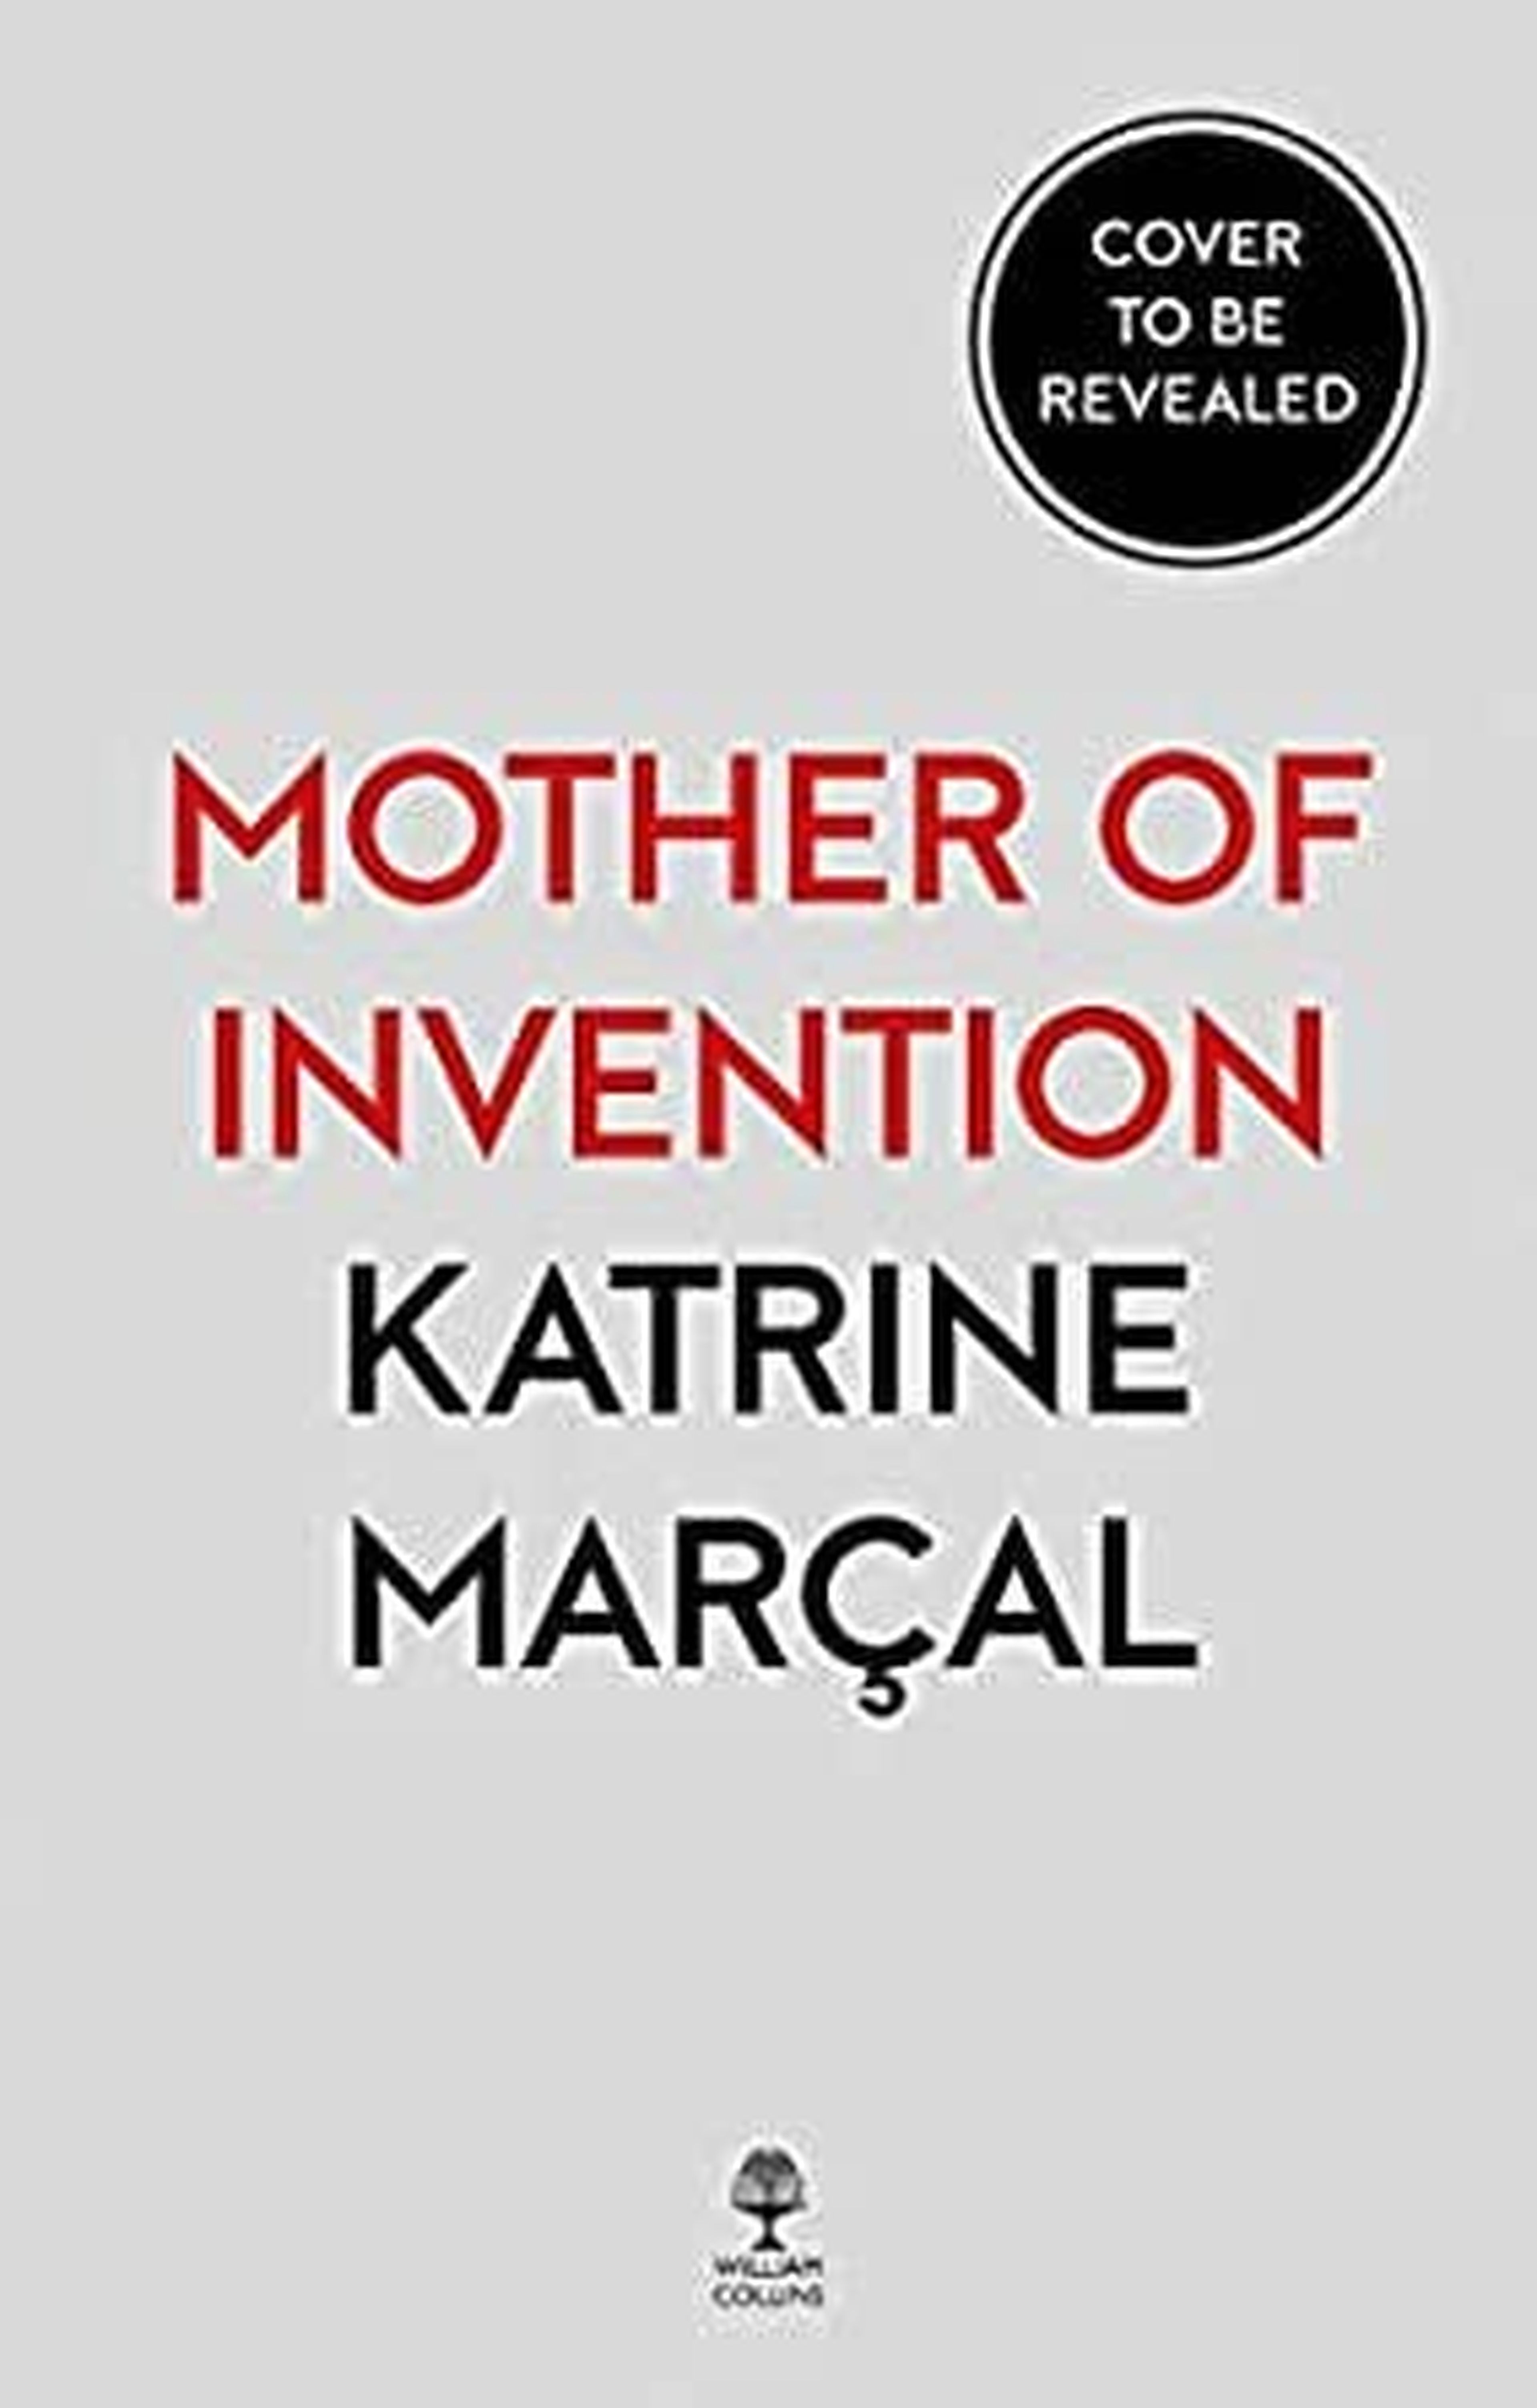 'Mother of Invention: How Good Ideas Get Ignored in An Economy Built for Men'